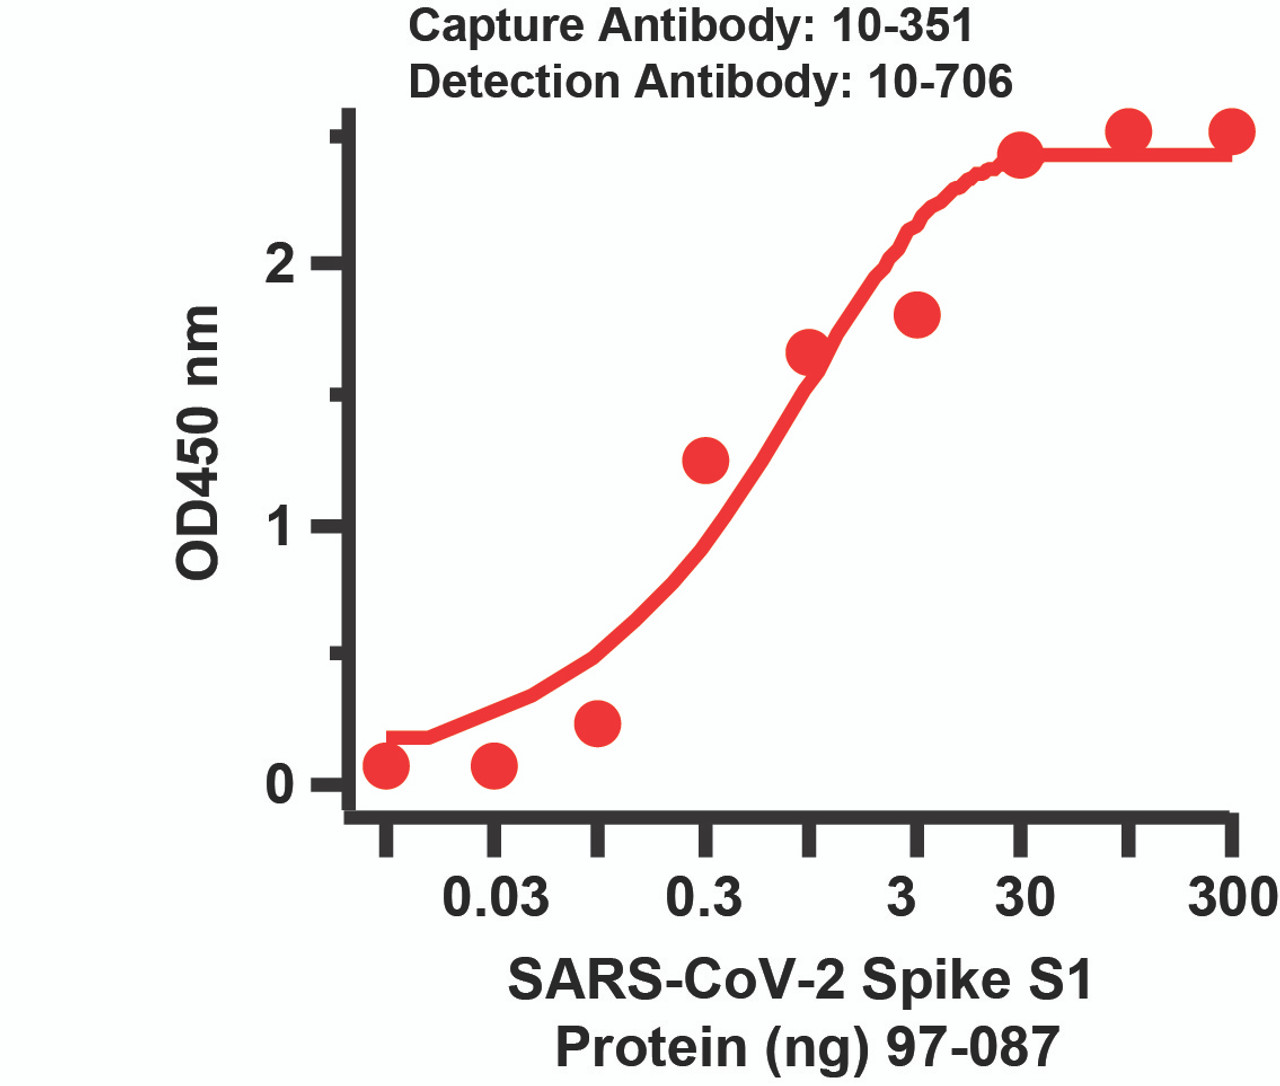 <strong>Figure 1 Sandwich ELISA for SARS-CoV-2 (COVID-19) Matched Pair Spike S1 Antibodies</strong><br>
Antibodies: SARS-CoV-2 (COVID-19) Spike Antibodies, 10-351 and 10-706. A sandwich ELISA was performed using SARS-CoV-2 Spike S1 antibody (10-351, 2ug/ml) as capture antibody, the Spike S1 recombinant protein as the binding protein (97-087) , and the anti-SARS-CoV-2 Spike S1 antibody (10-706, 1ug/ml) as the detection antibody. Secondary: Mouse anti-human IgG HRP conjugate (PM6727) at 1:10000 dilution. Detection range is from 0.03 ng to 300 ng. EC50 = 1.58 ng